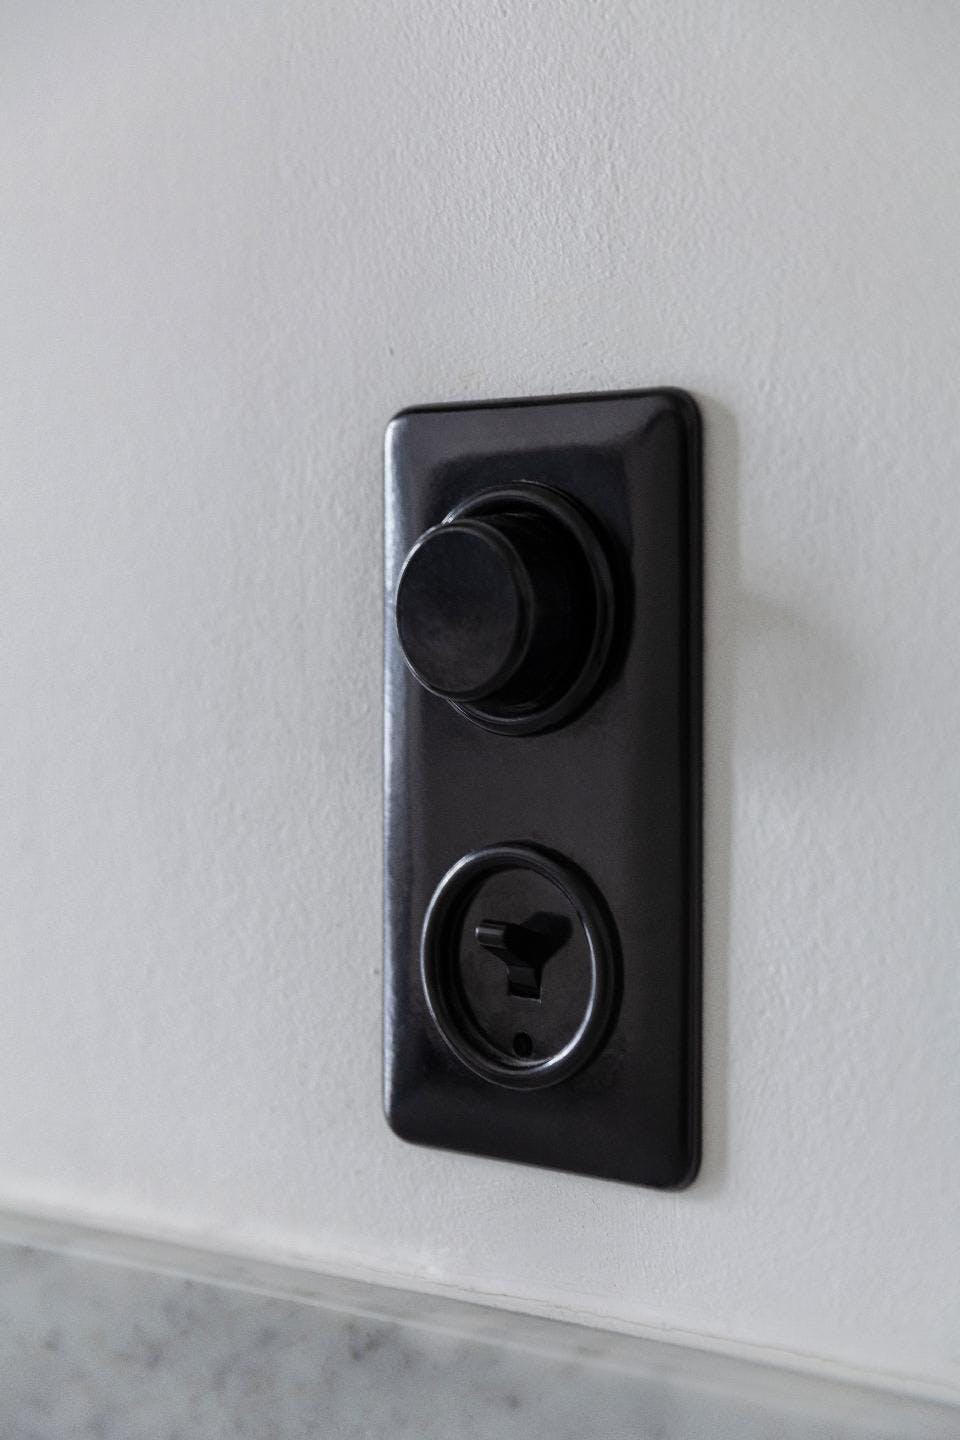 A black and silver electronic device, possibly a remote control or a speaker, is mounted on a white wall.